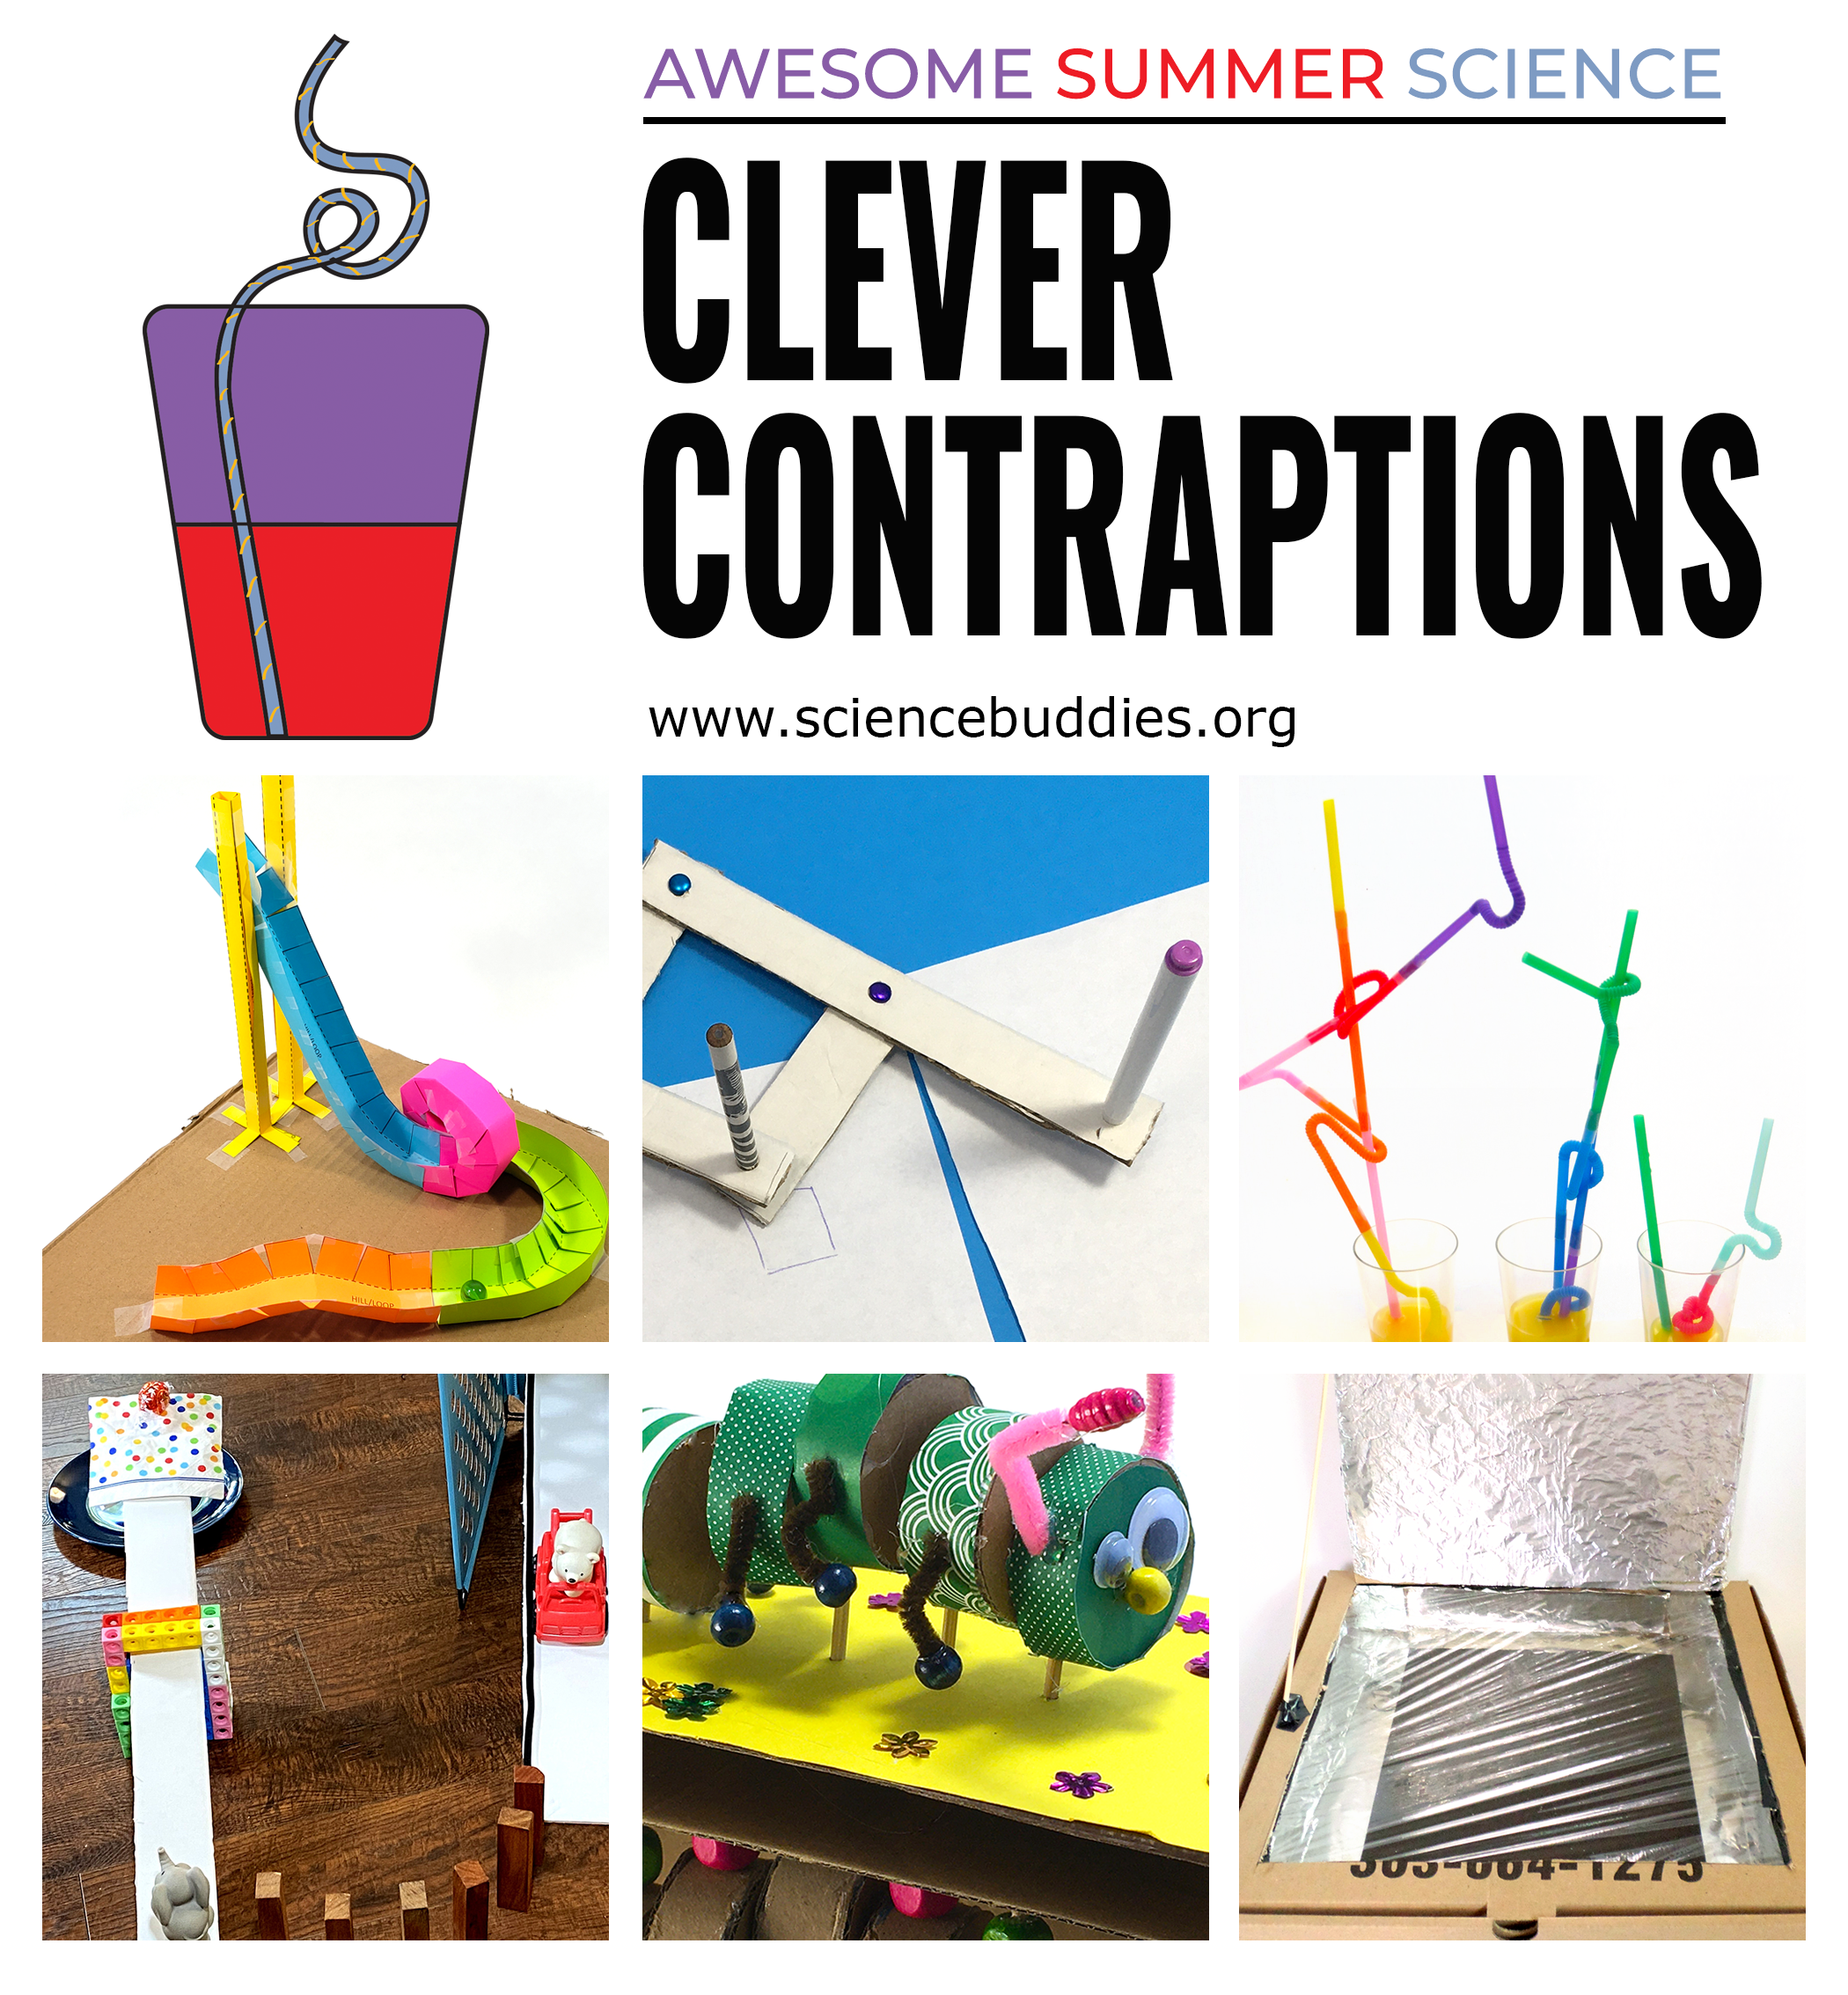 Rube Goldberg machine, caterpillar automaton, pantograph drawing tool, long straw, solar pizza oven Clever Contraptions Week 6 - part of Awesome Summer Science Experiments series